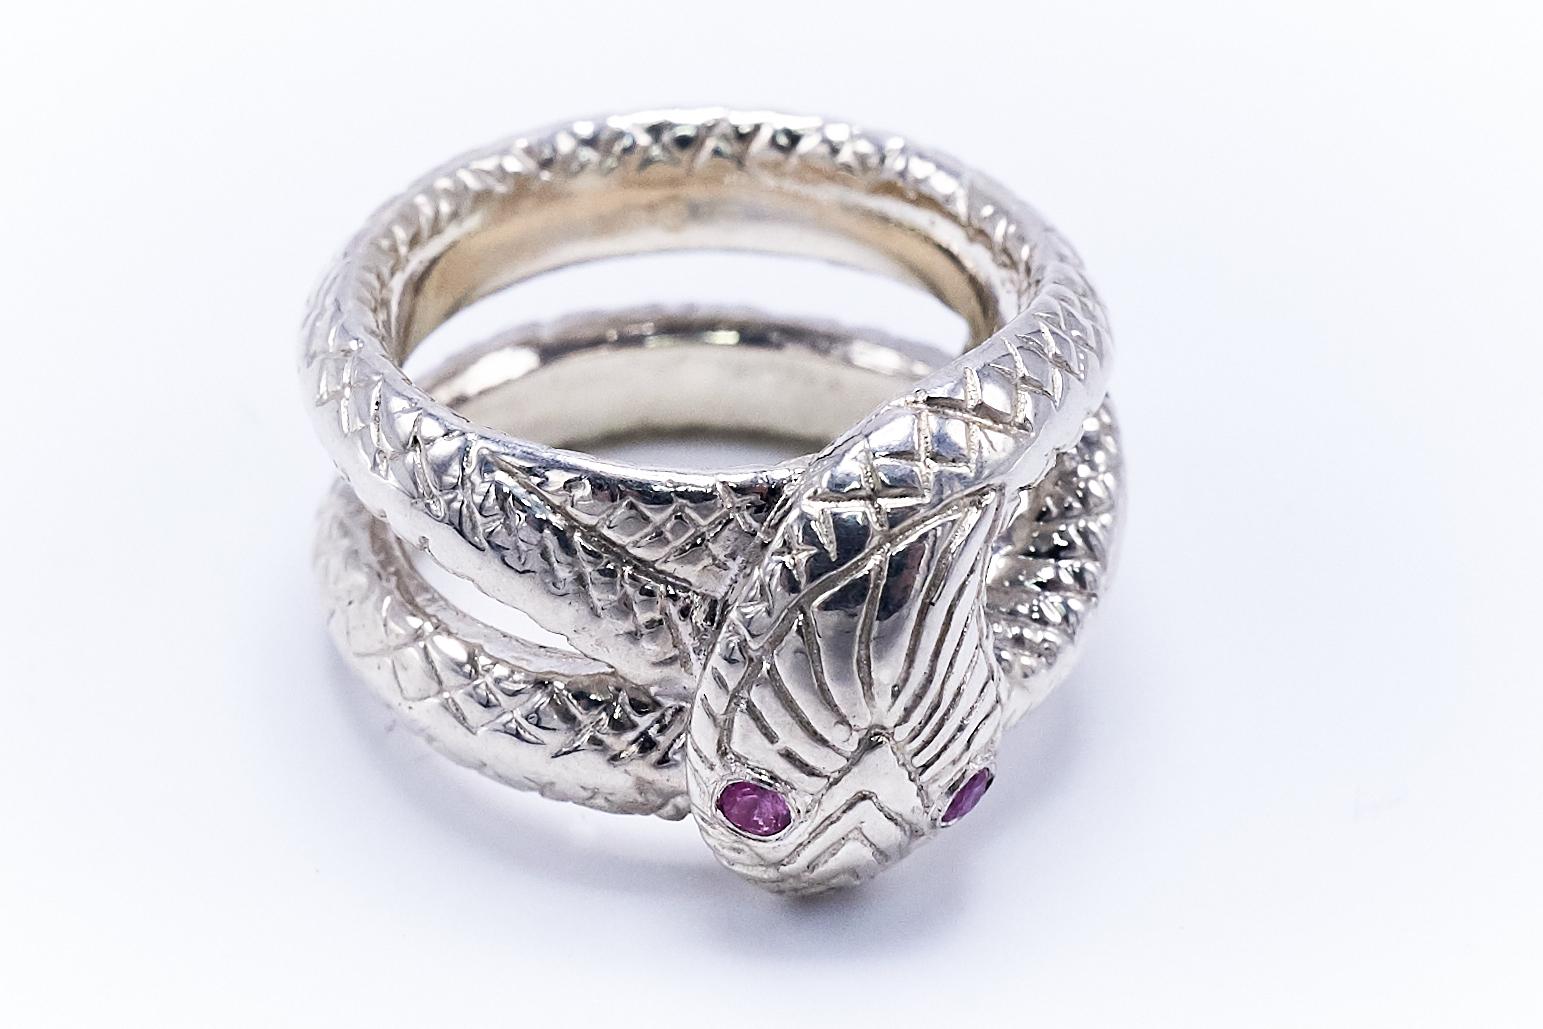 Pink Sapphire Snake Silver Ring Cocktail Ring Victorian Style J Dauphin

J DAUPHIN 